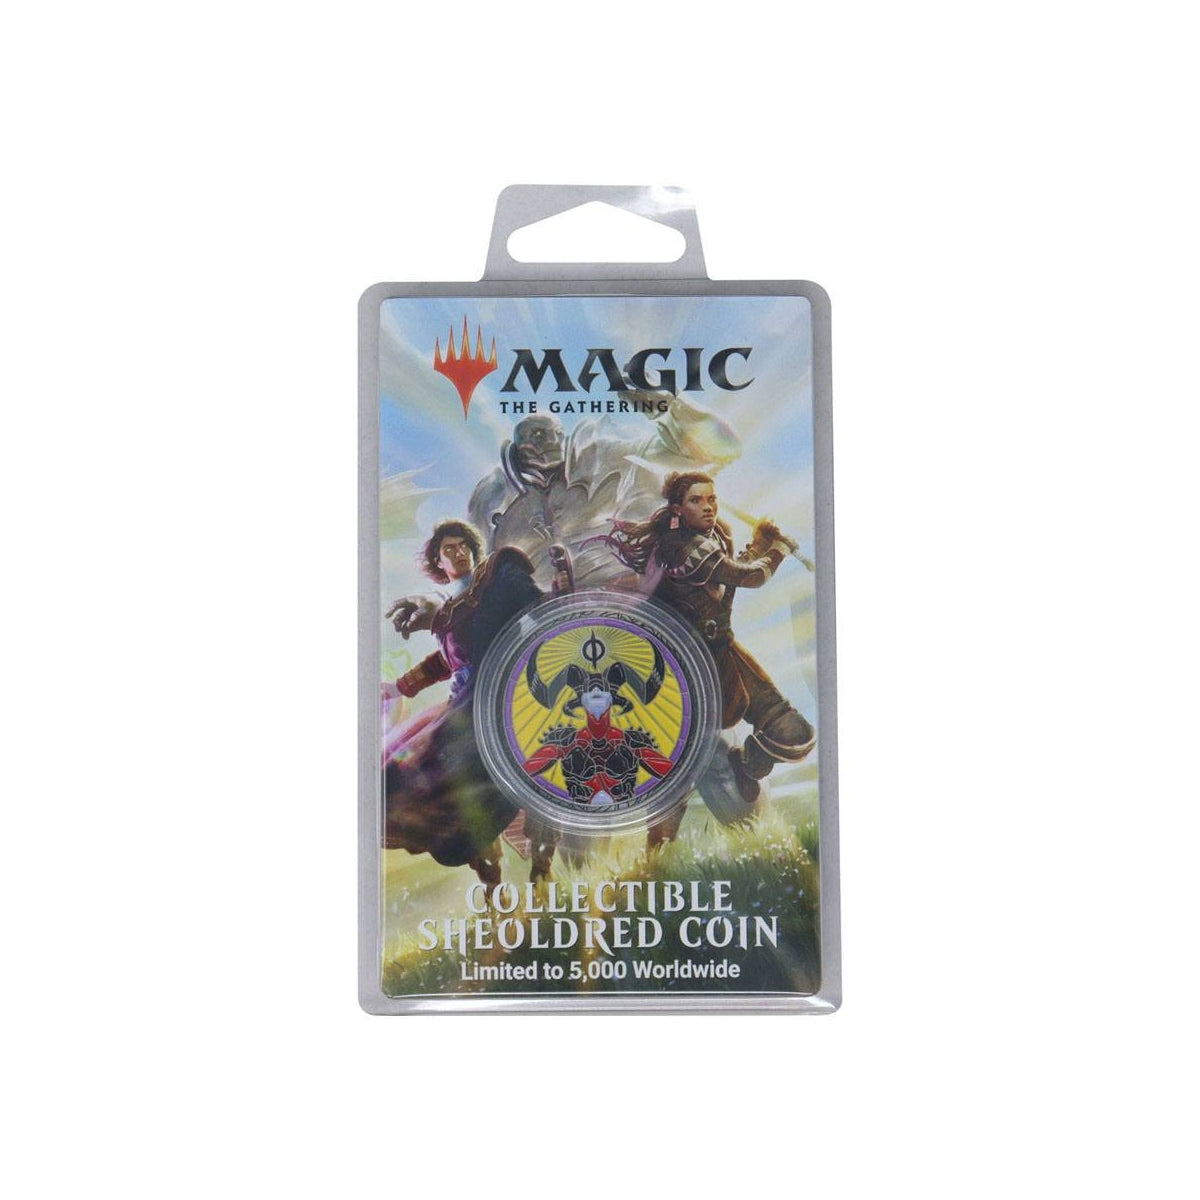 Magic The Gathering - Pièce de collection - Dominaria United - Dominaria Uni - Sheoldred - Édition Limitée - Neuf sous blister